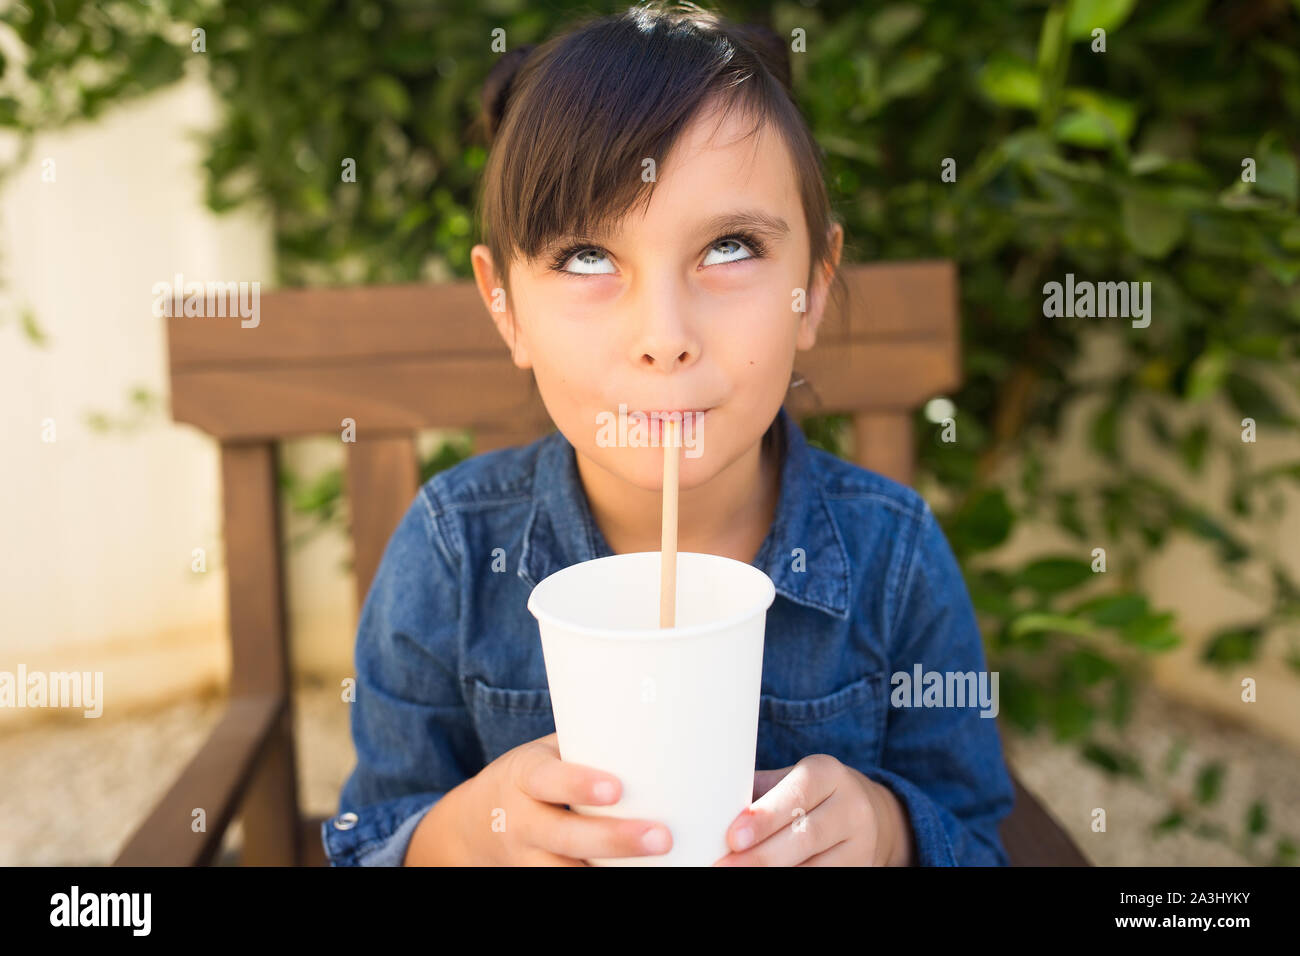 Girl making a face expression while drinking Stock Photo